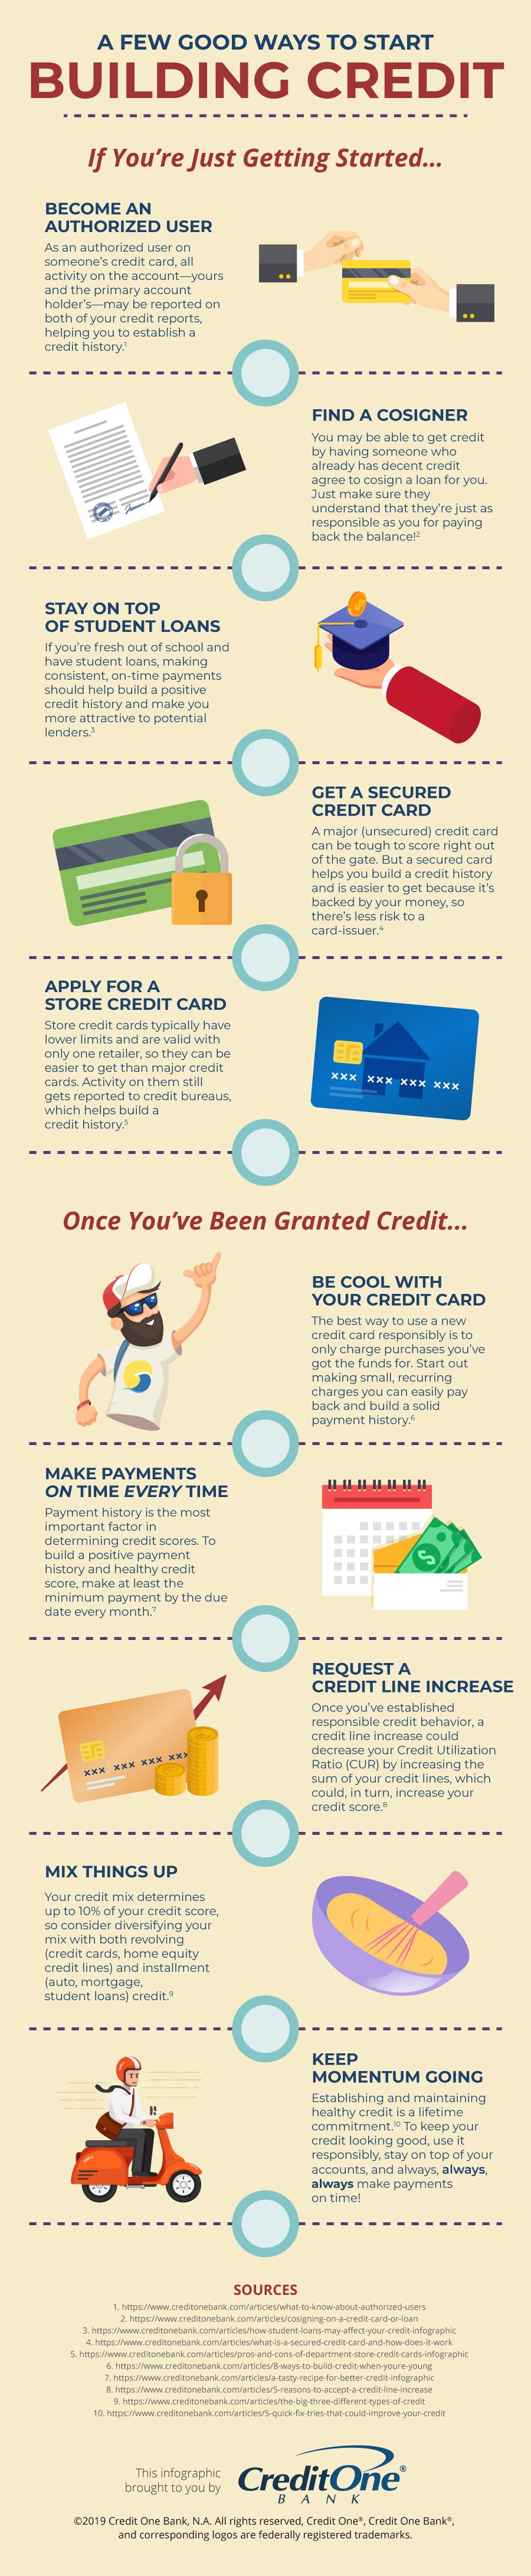 Tips for Building Credit